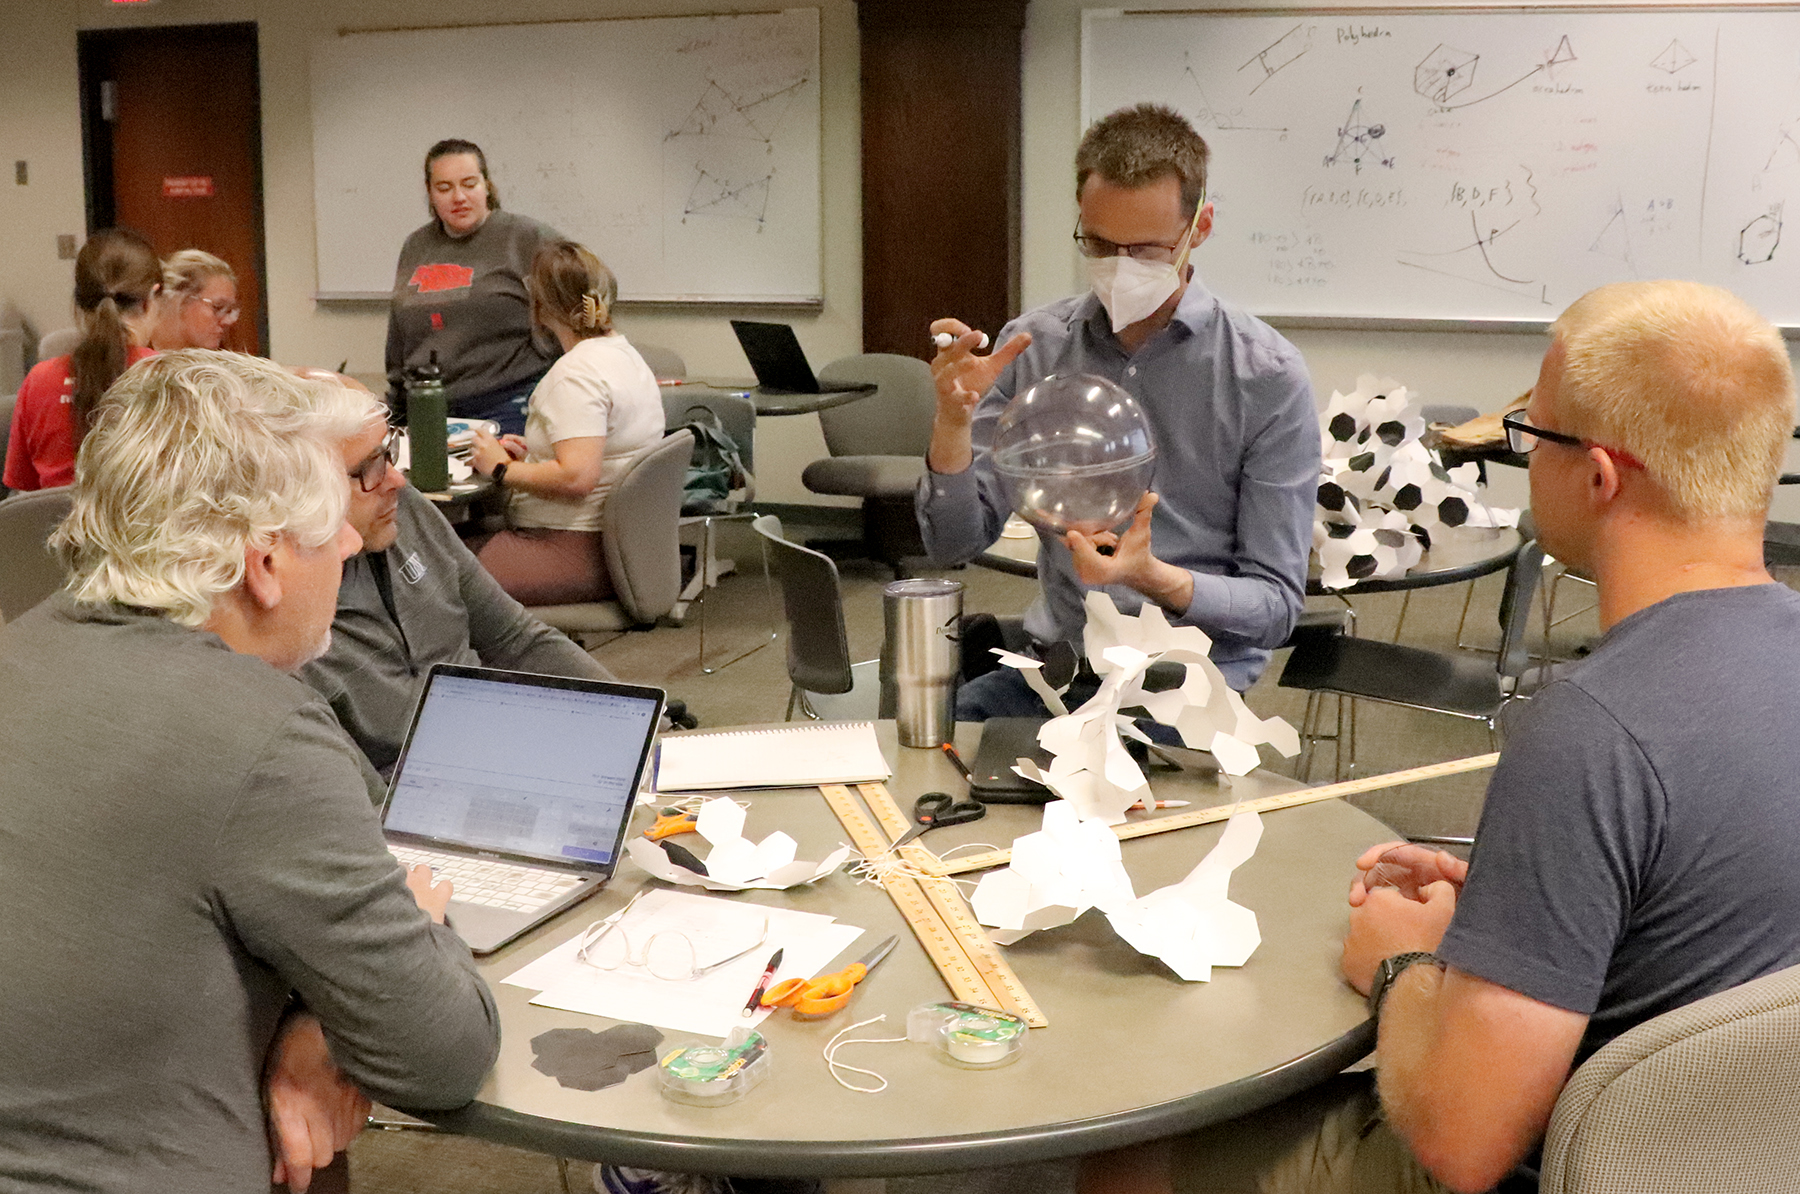 Dr. Adam Larios (second from right) demonstrates on a Lenart sphere during Math 812T: Geometry for Geometry Teachers in Lincoln, July 2022. (Lindsay Augustyn/CSMCE)